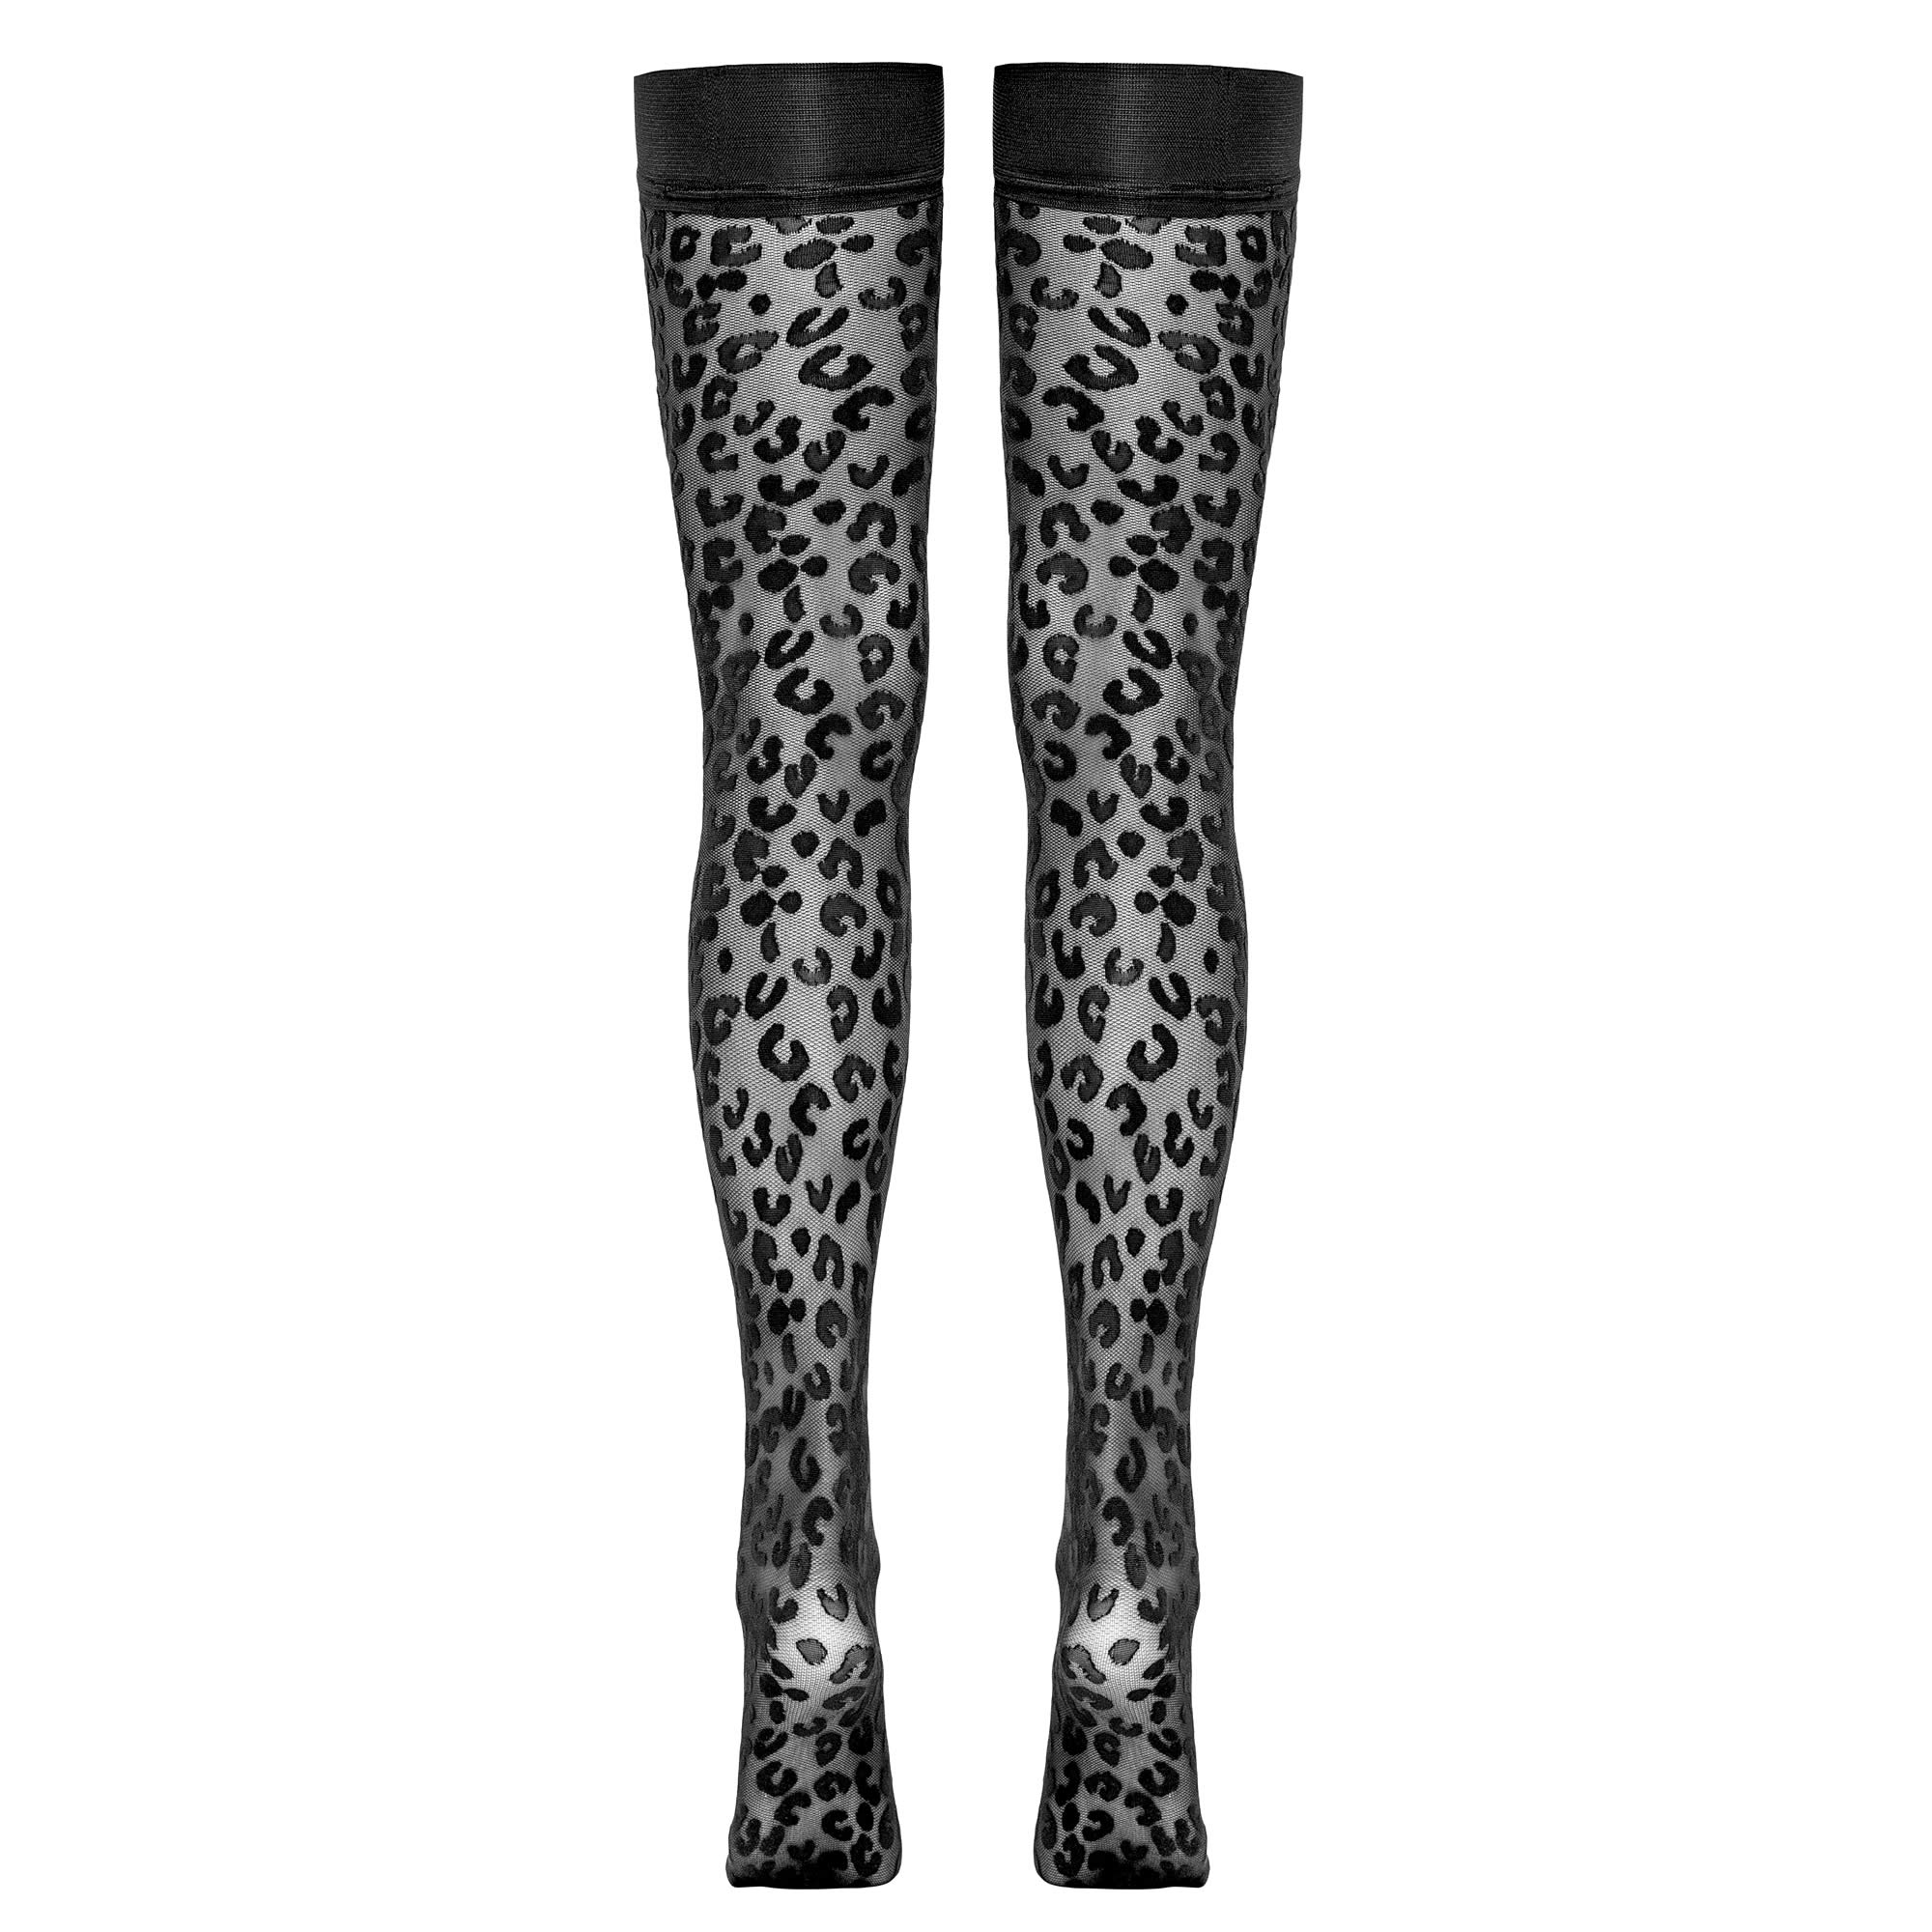 Stay-Up Stockings with Leopard Pattern